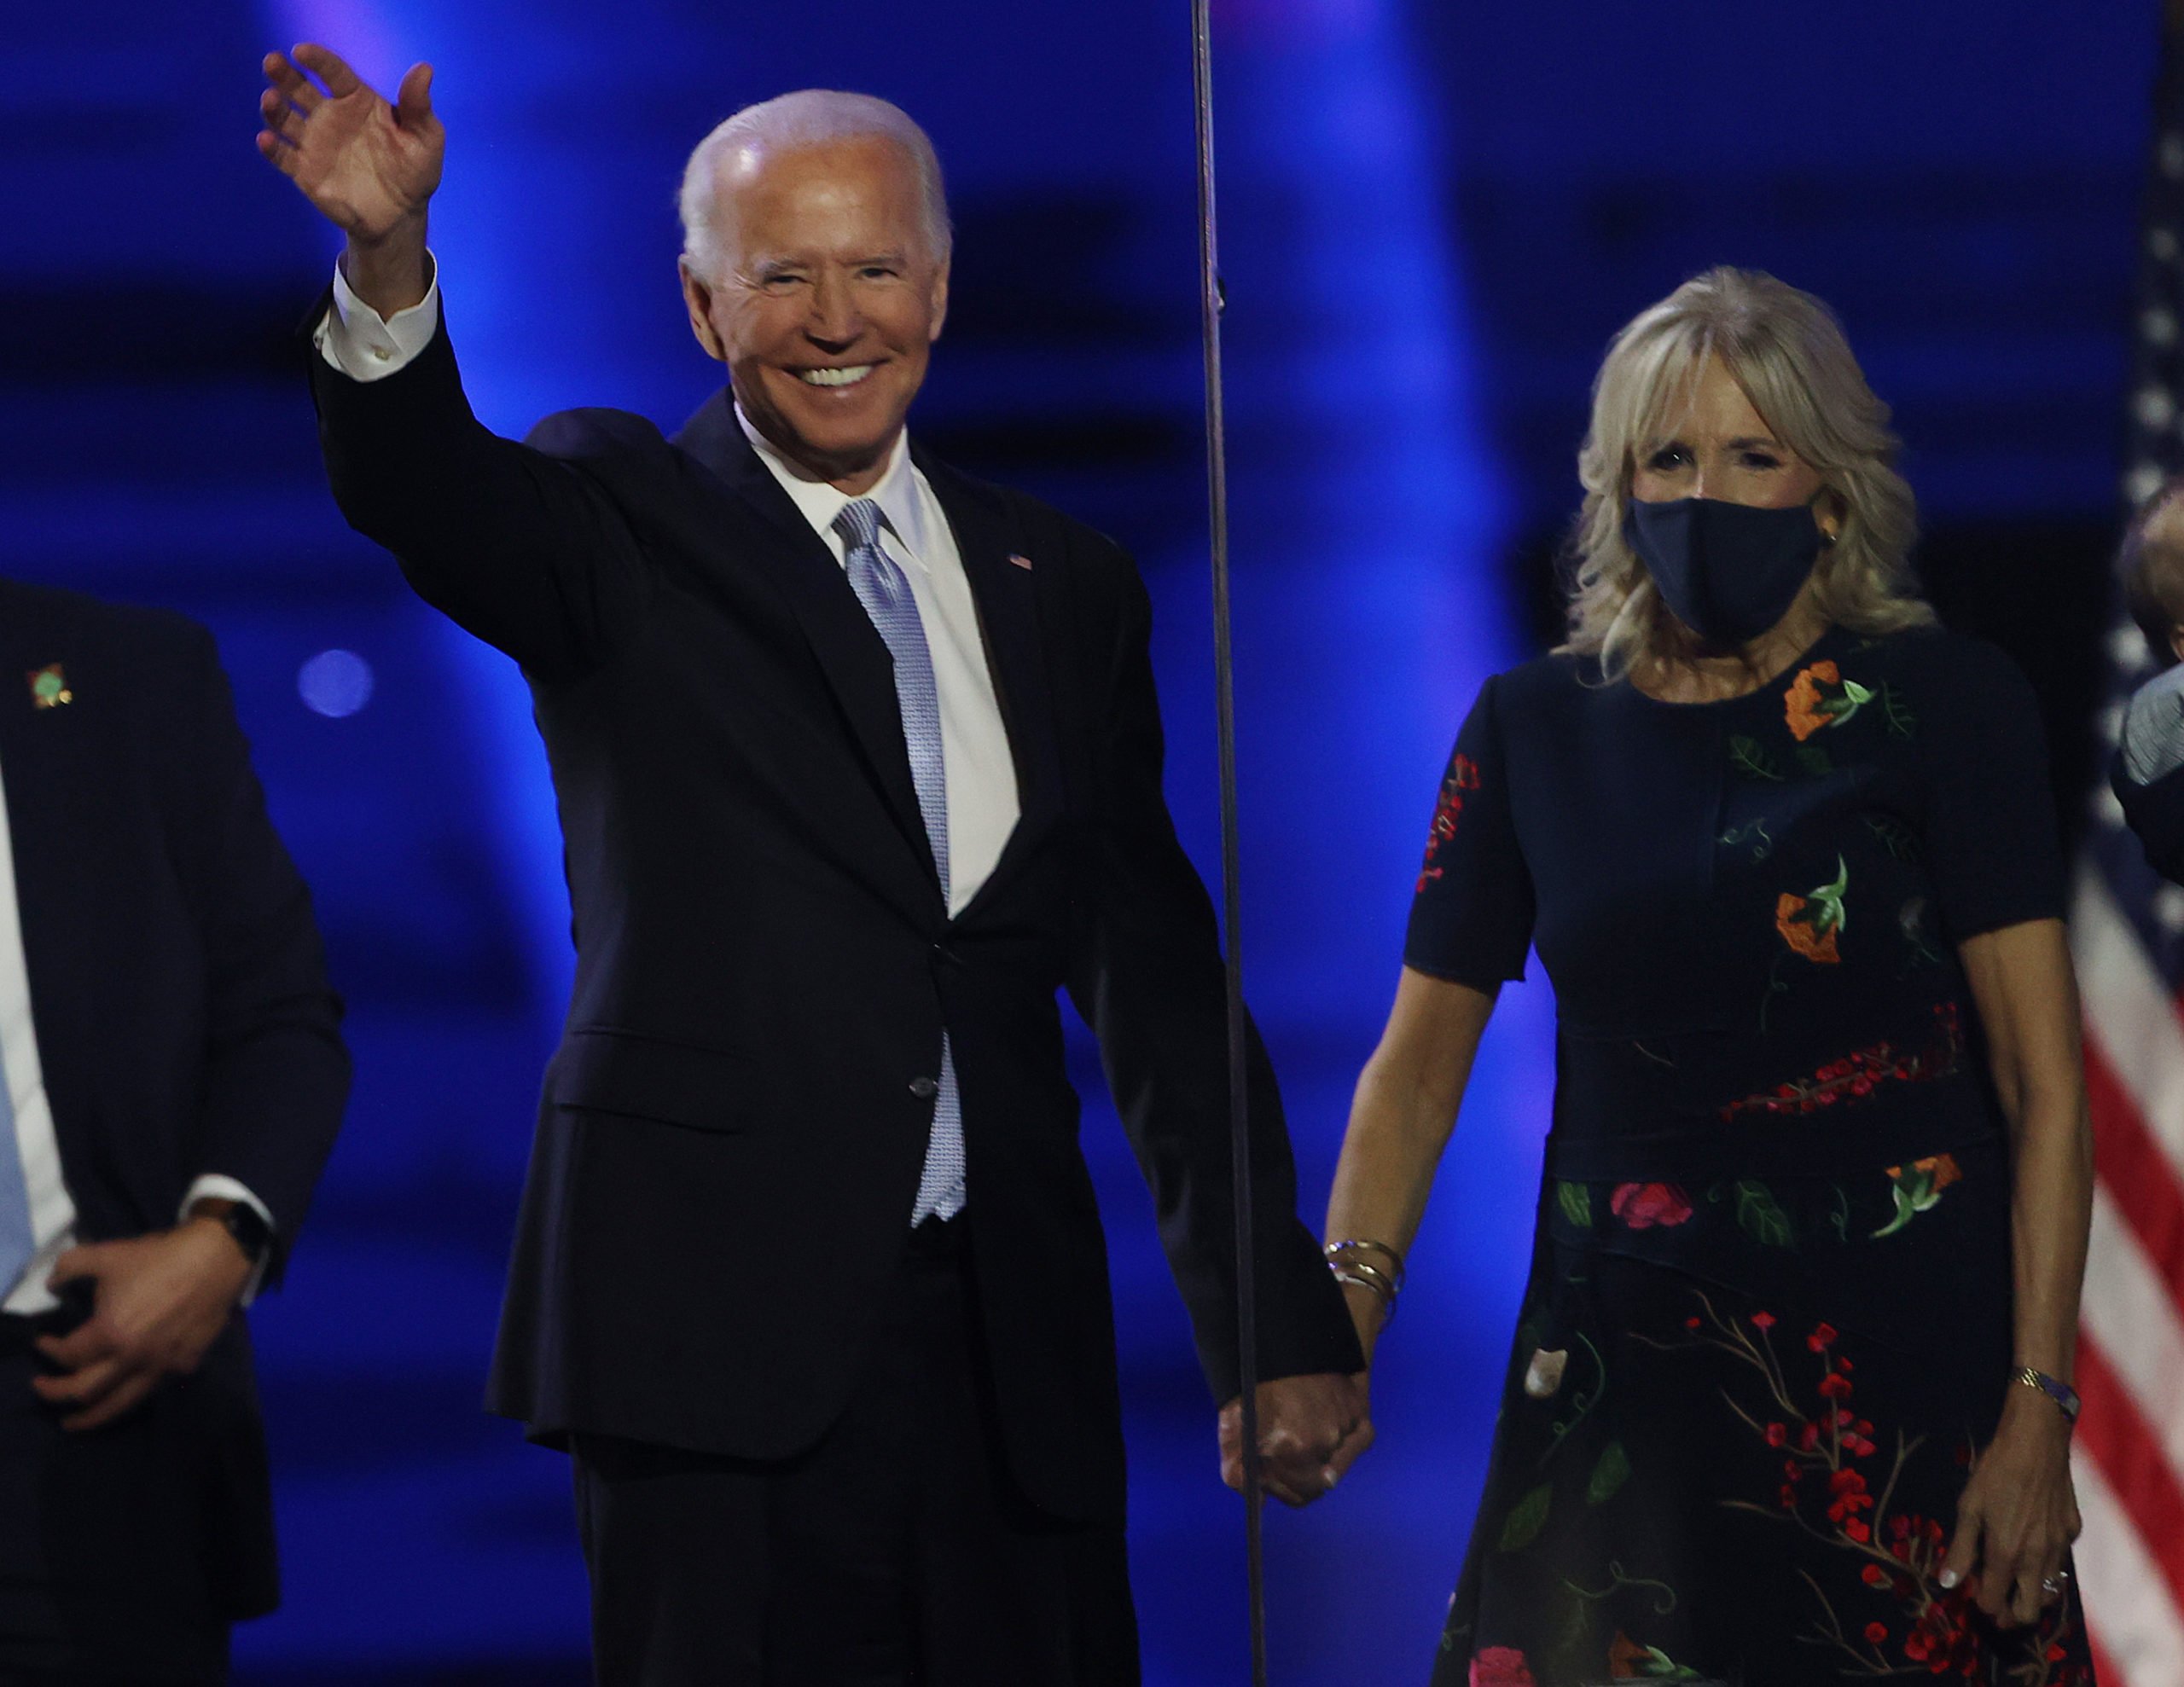 WILMINGTON, DELAWARE - NOVEMBER 07: President-elect Joe Biden and Jill Biden wave to the crowd after Biden's address to the nation from the Chase Center November 07, 2020 in Wilmington, Delaware. After four days of counting the high volume of mail-in ballots in key battleground states due to the coronavirus pandemic, the race was called for Biden after a contentious election battle against incumbent Republican President Donald Trump. (Photo by Tasos Katopodis/Getty Images)